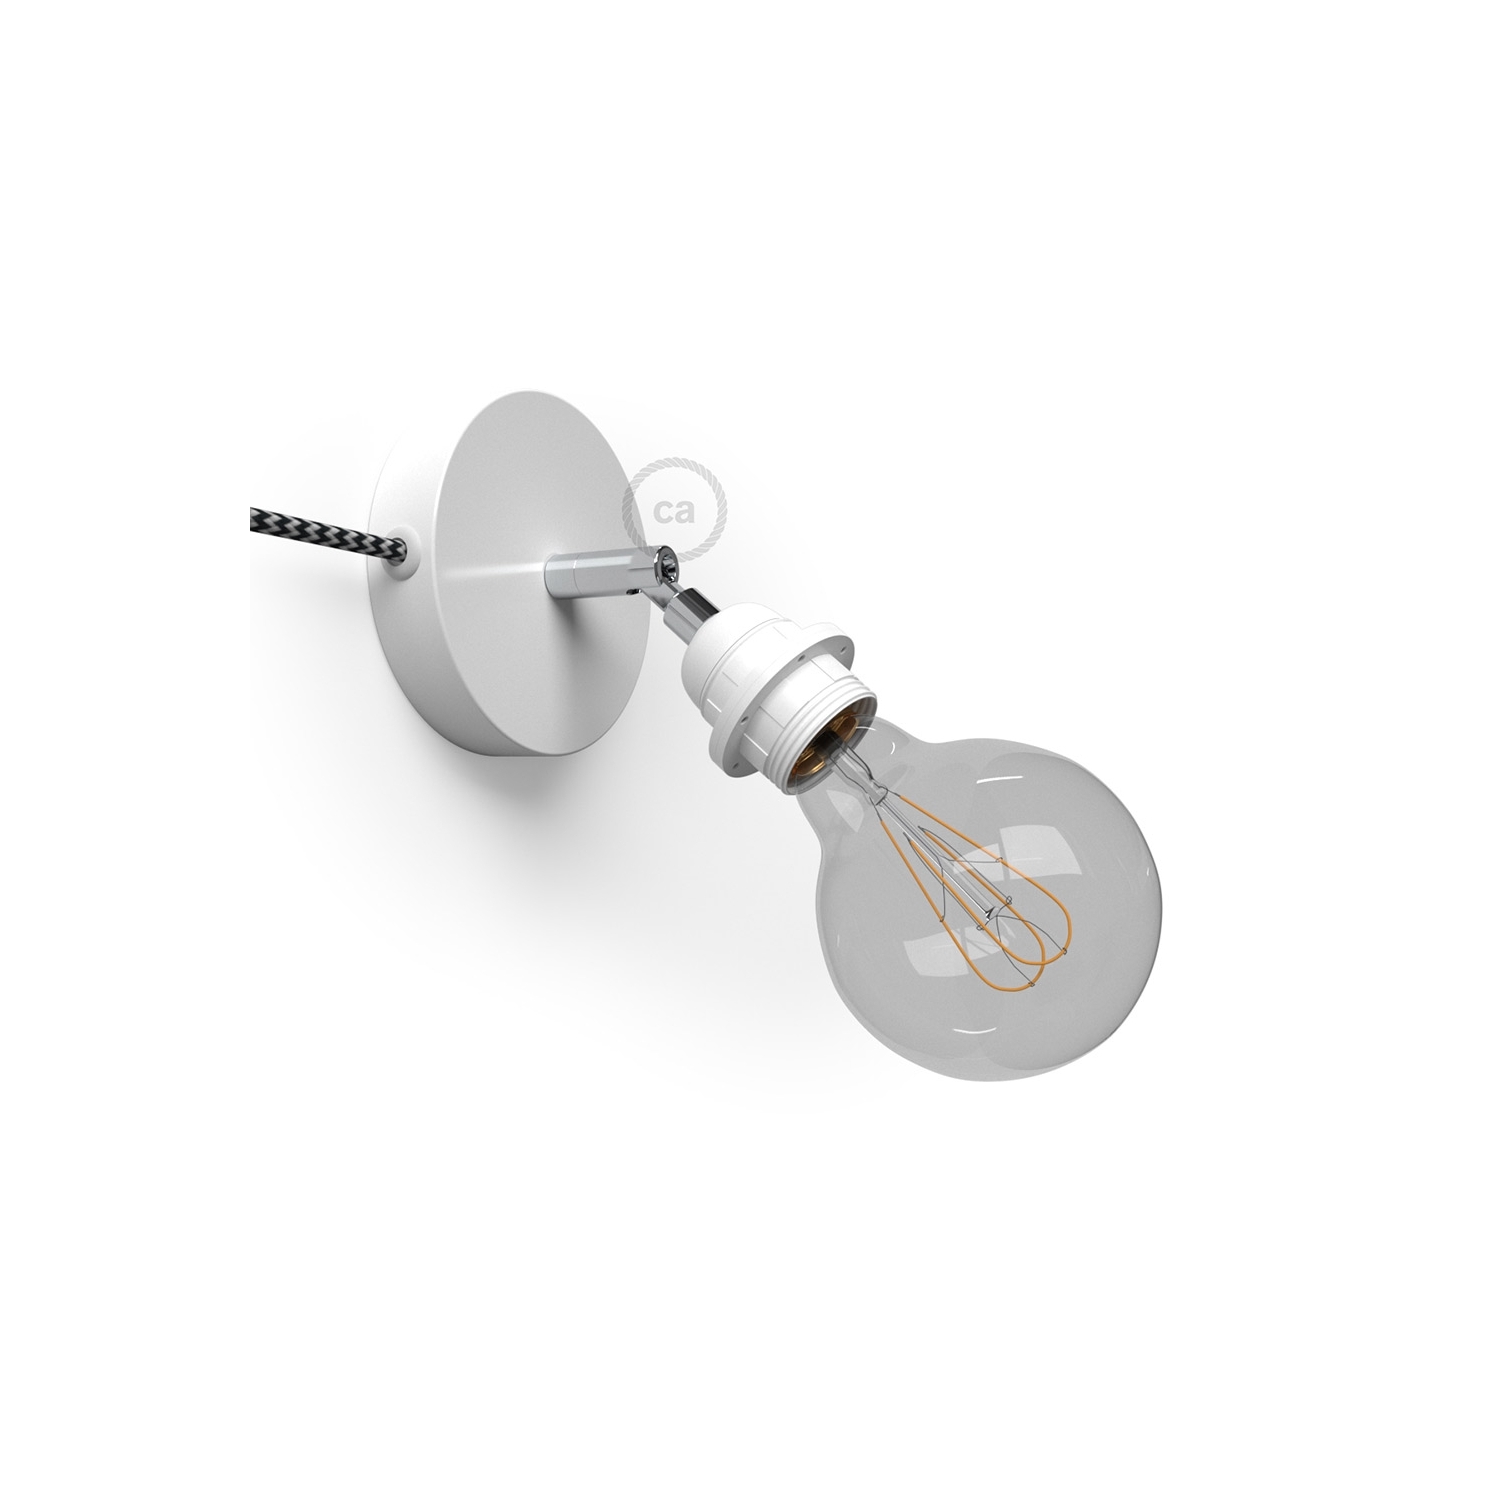 Spostaluce Metallo 90°, the white adjustable light source with E26 threaded socket, fabric cable and side holes